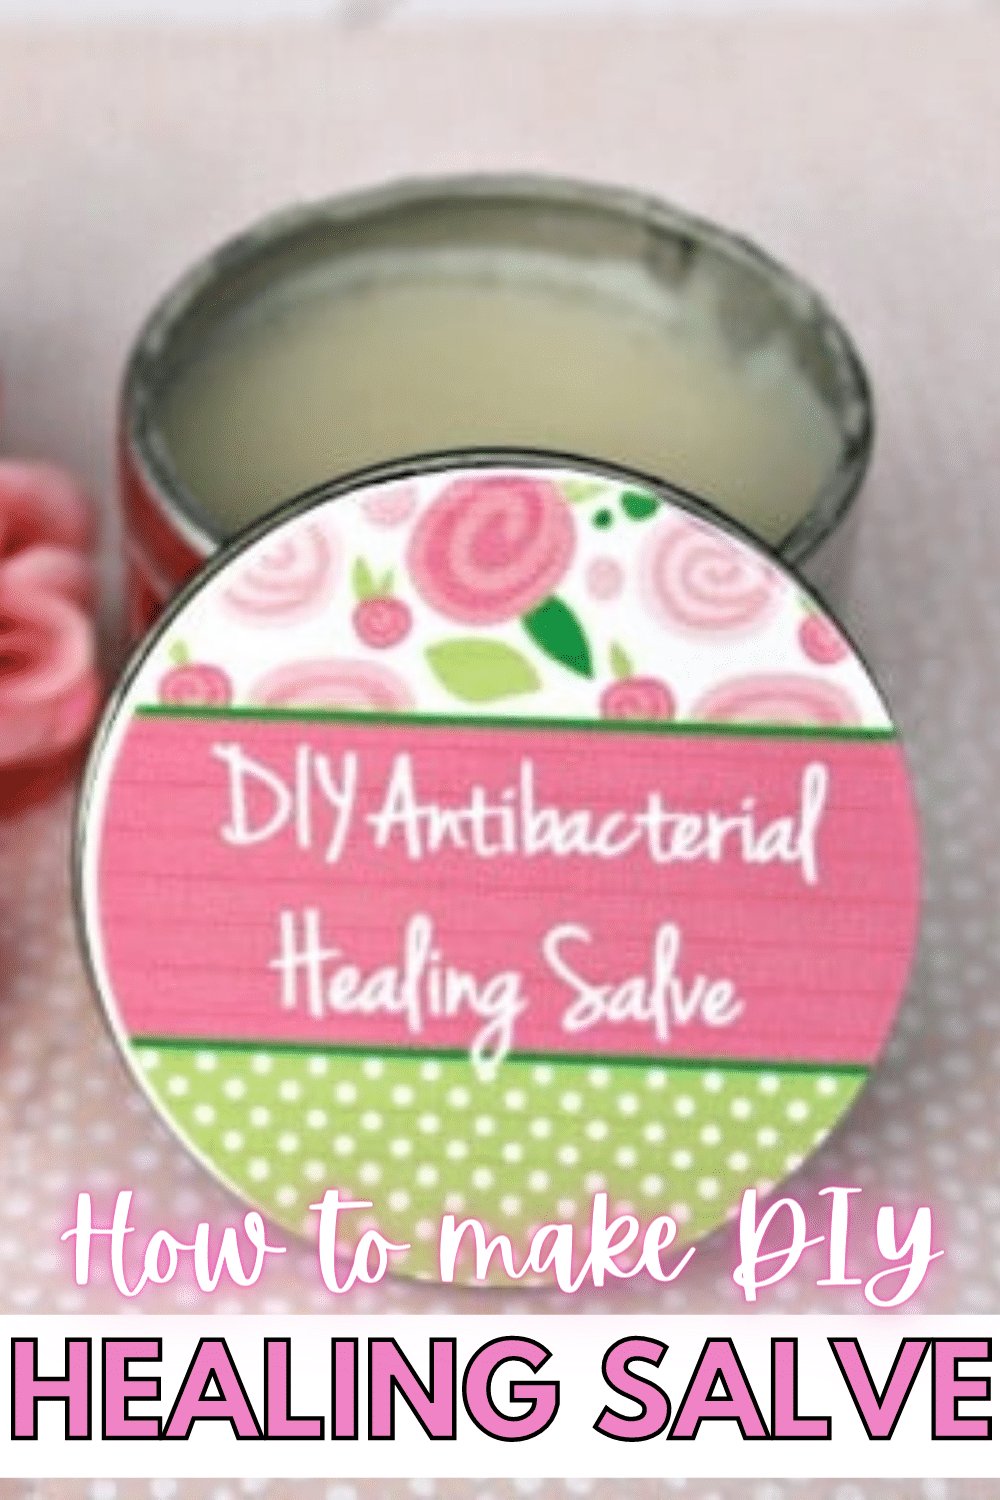 This DIY healing salve is easy to make and is perfect for so many things! Treats minor cuts and burns, insect bites, dry skin, and even warts! #natural #DIYbeauty via @wondermomwannab